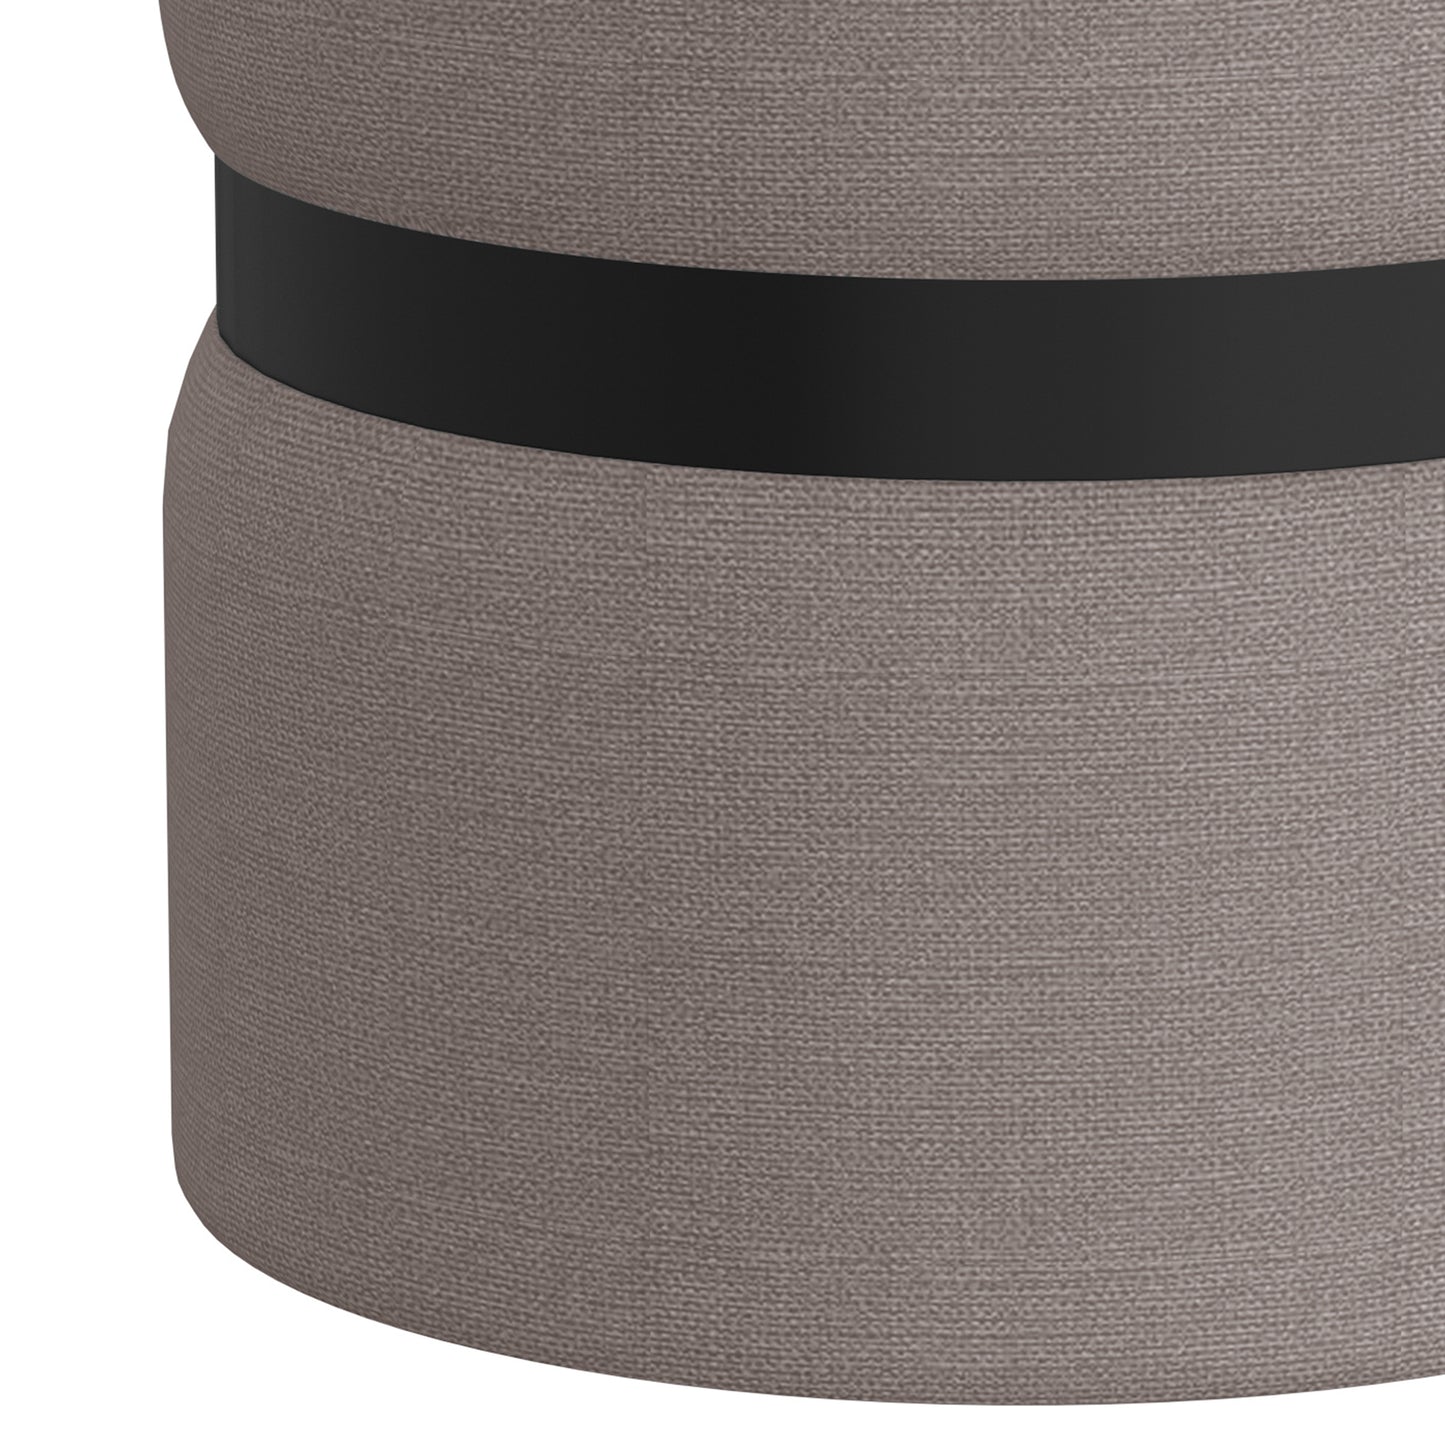 Demi Round Ottoman and Warm Grey and Black